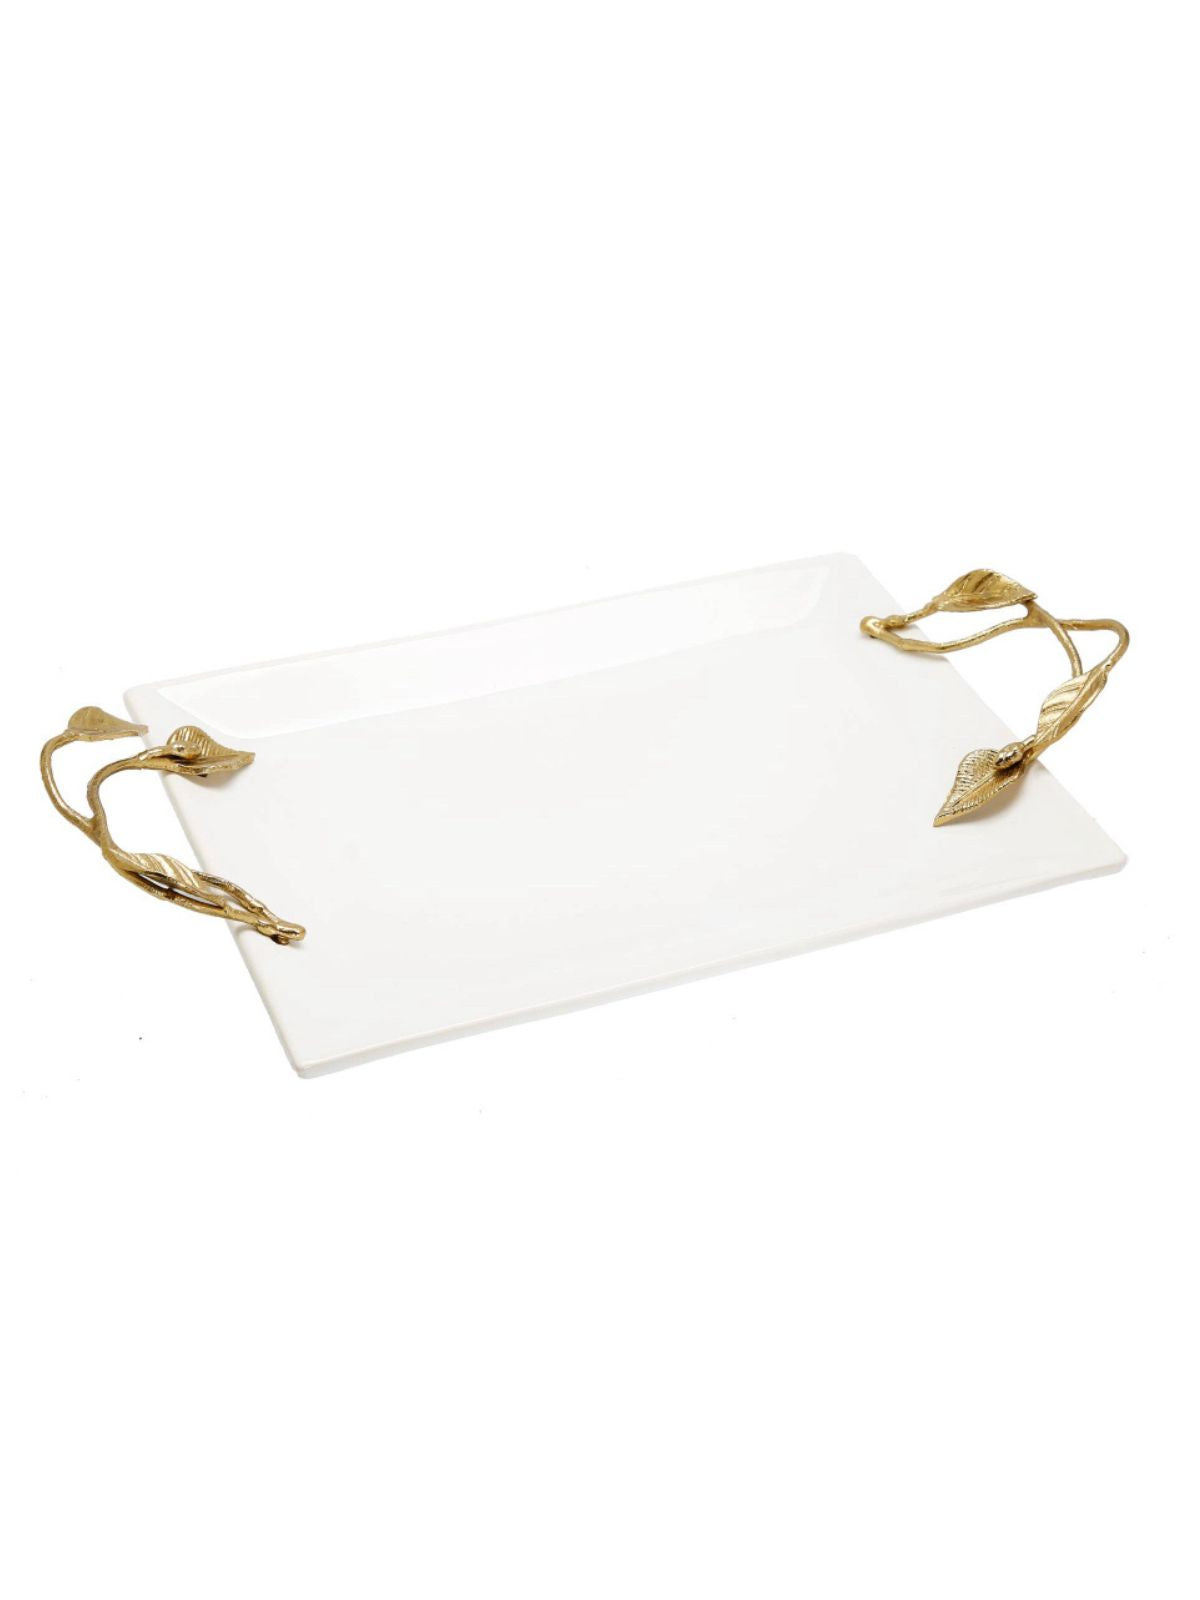 White Ceramic Tray with Gold Leaf Designed Handles, Side View.